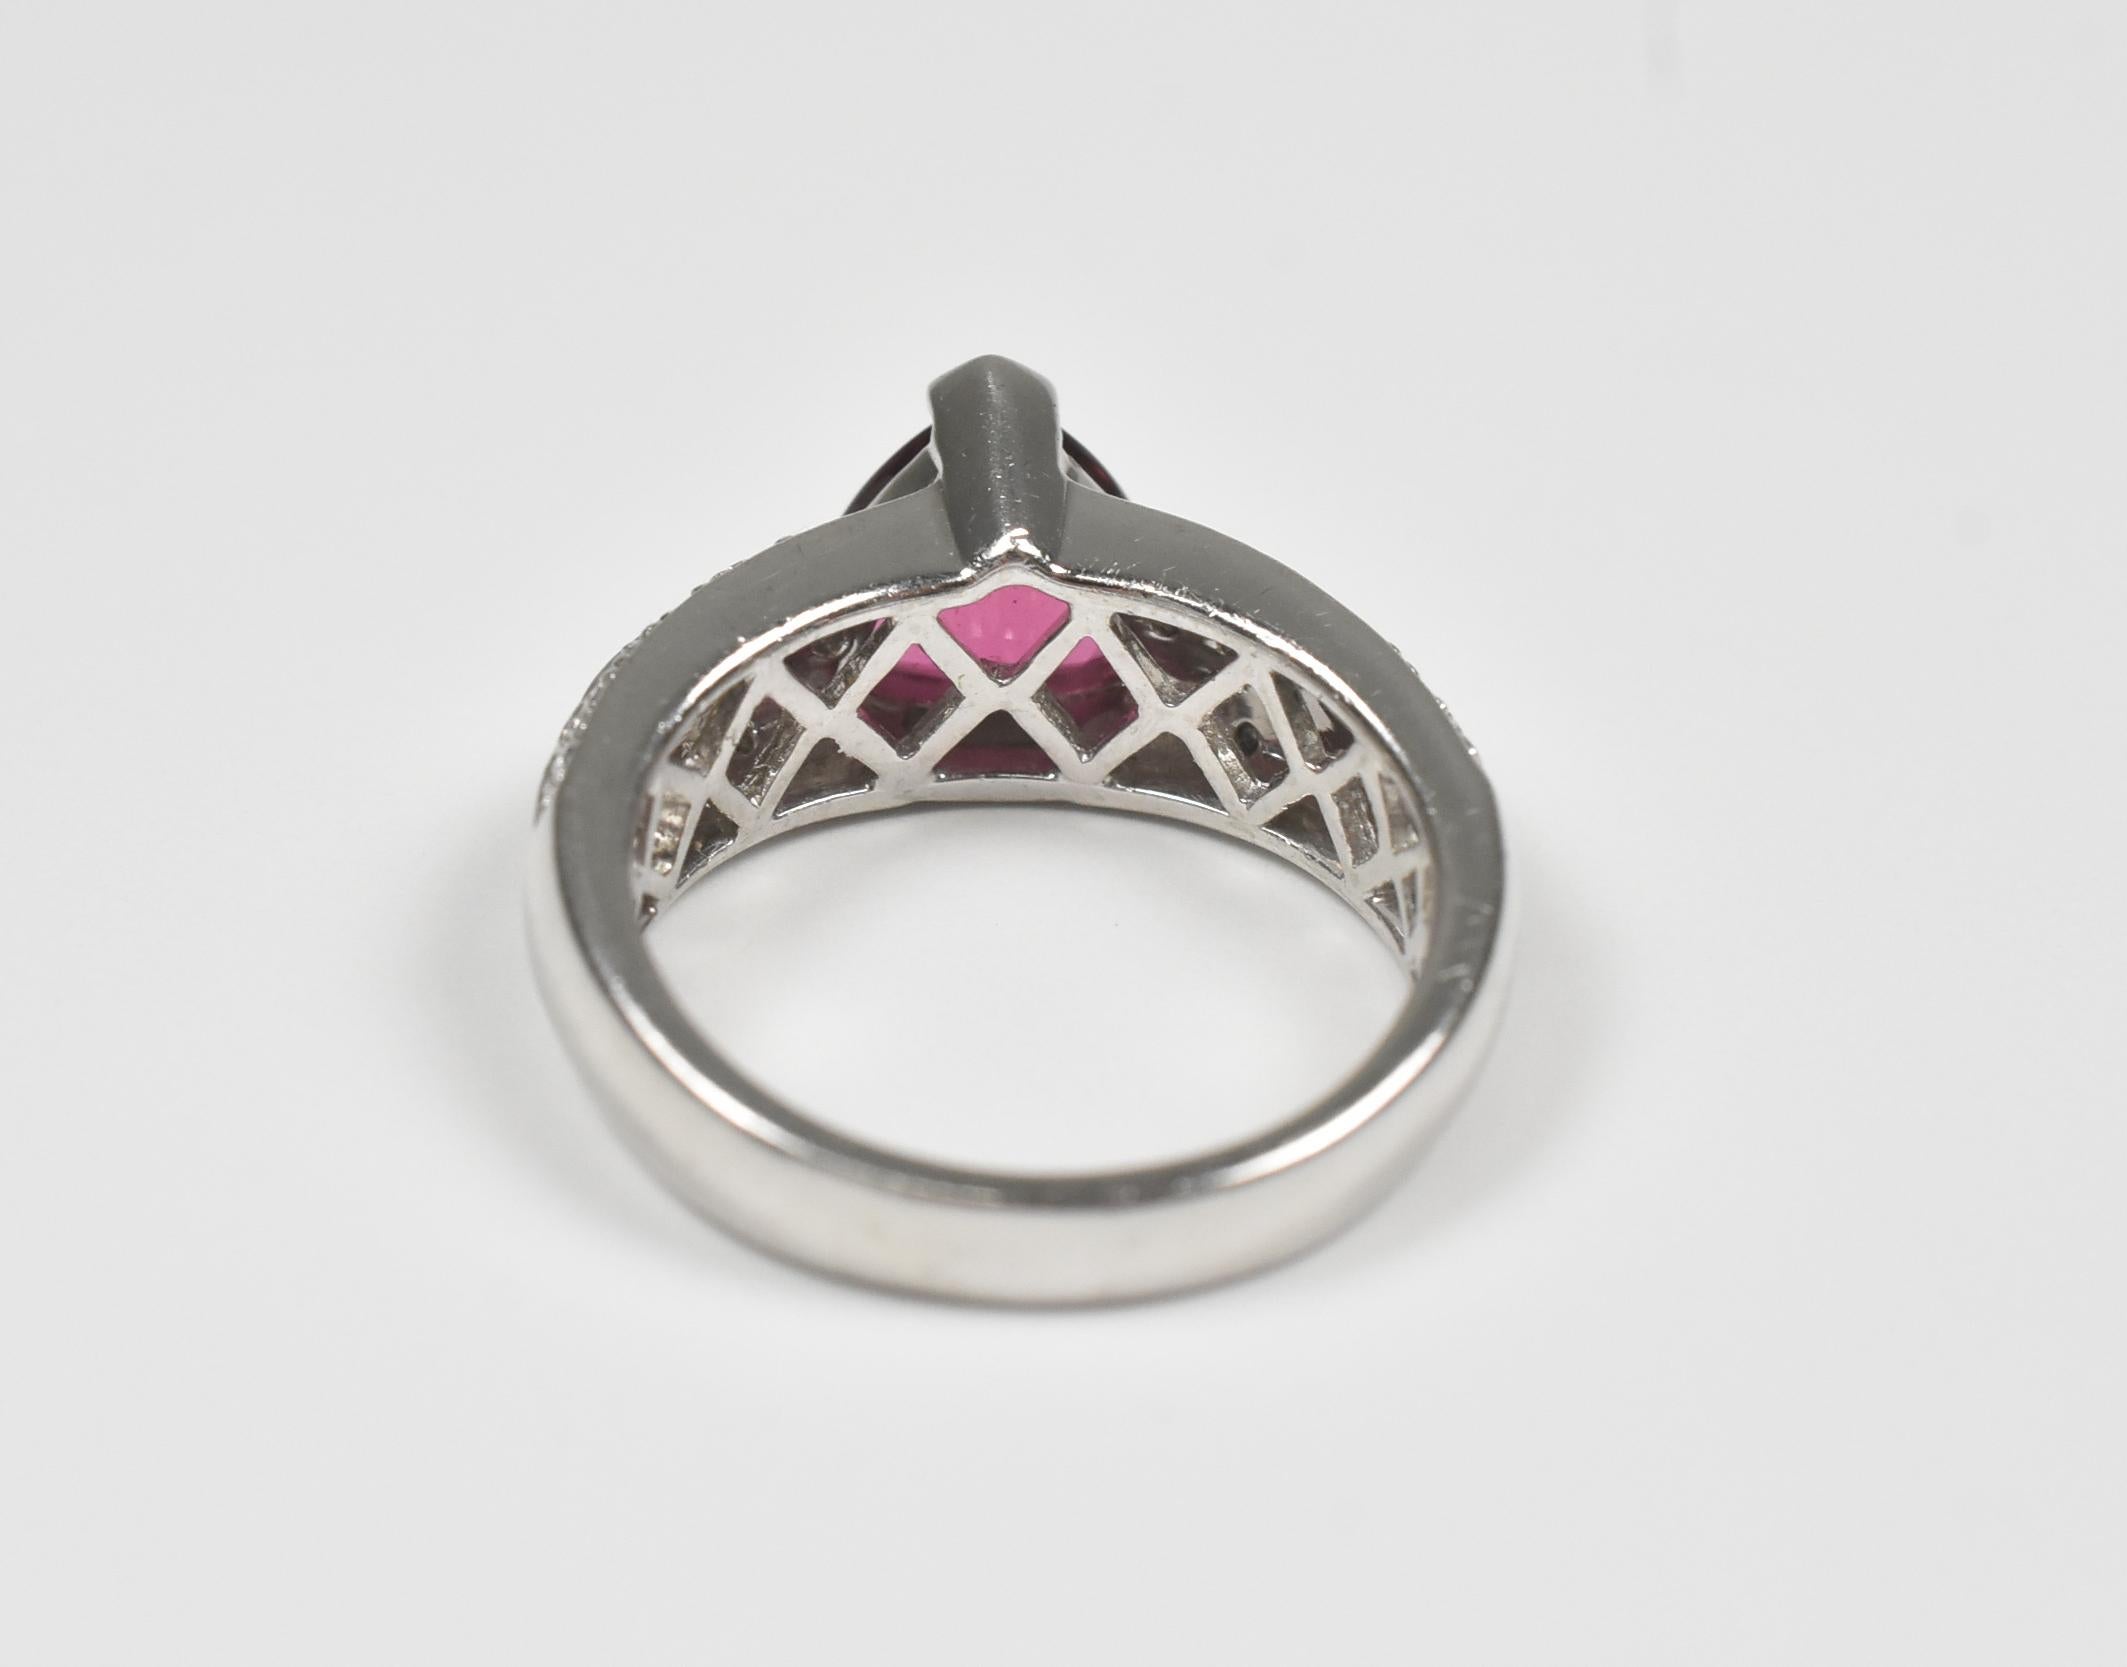 Laura Ramsey ladies platinum Rubellite tourmaline and diamond ring, size 8. Center triangular Rubellite Tourmaline stone measures 9mm x 9mm, 0.5 carat of diamonds flank the sides of the ring. Stamped LR and platinum, tested, light scratches as